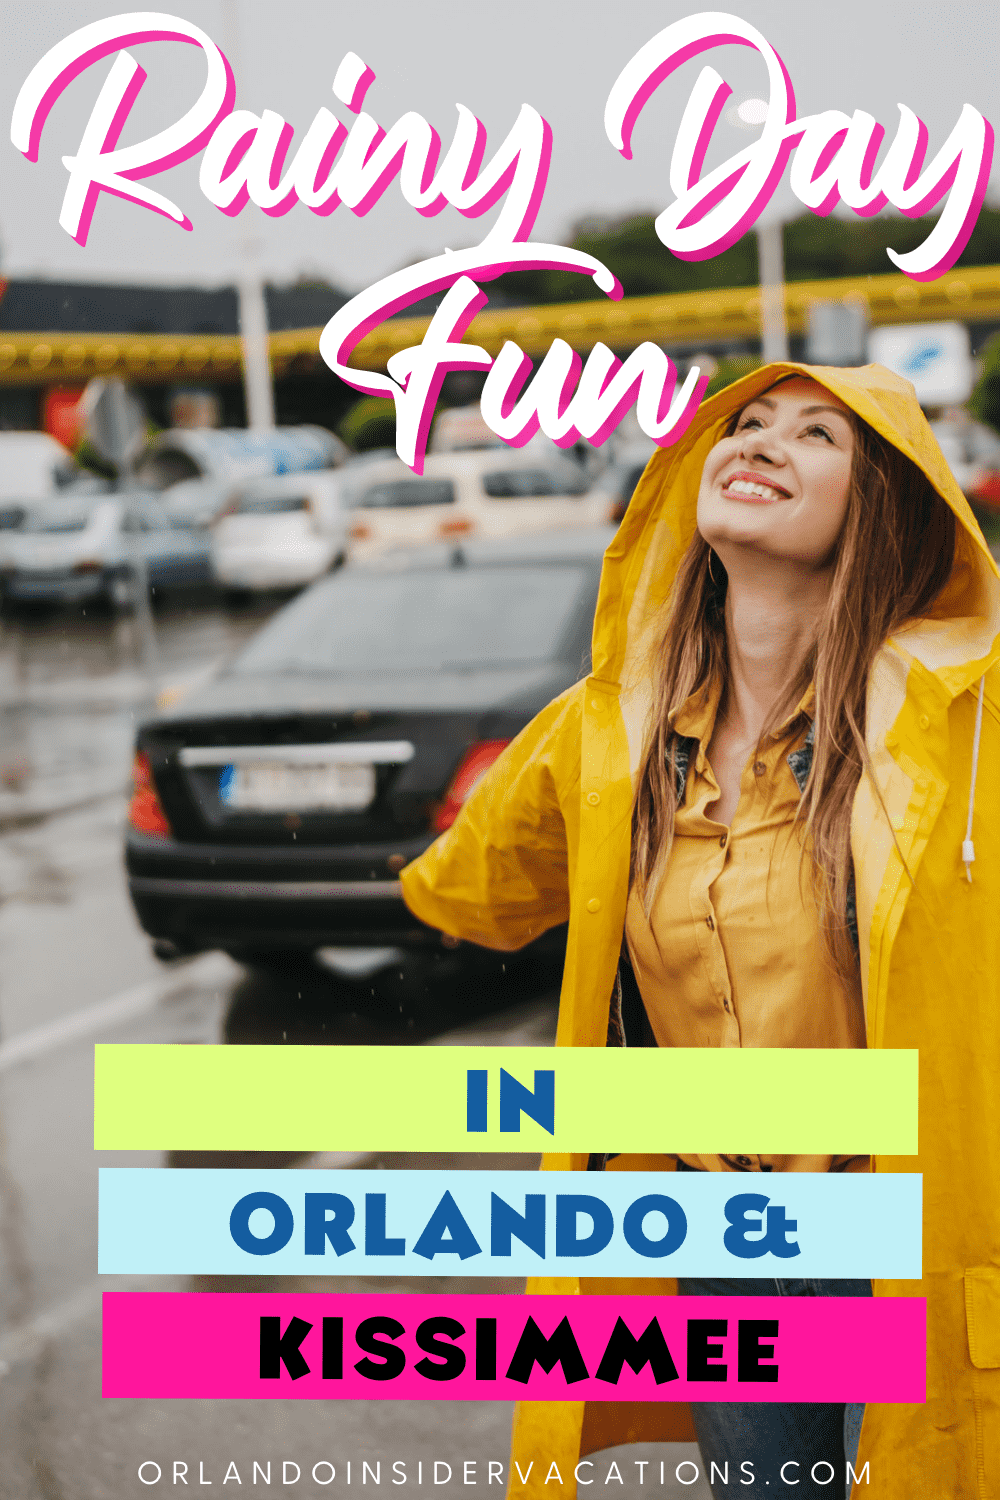 Free & Cheap Things to Do in Orlando & Kissimmee